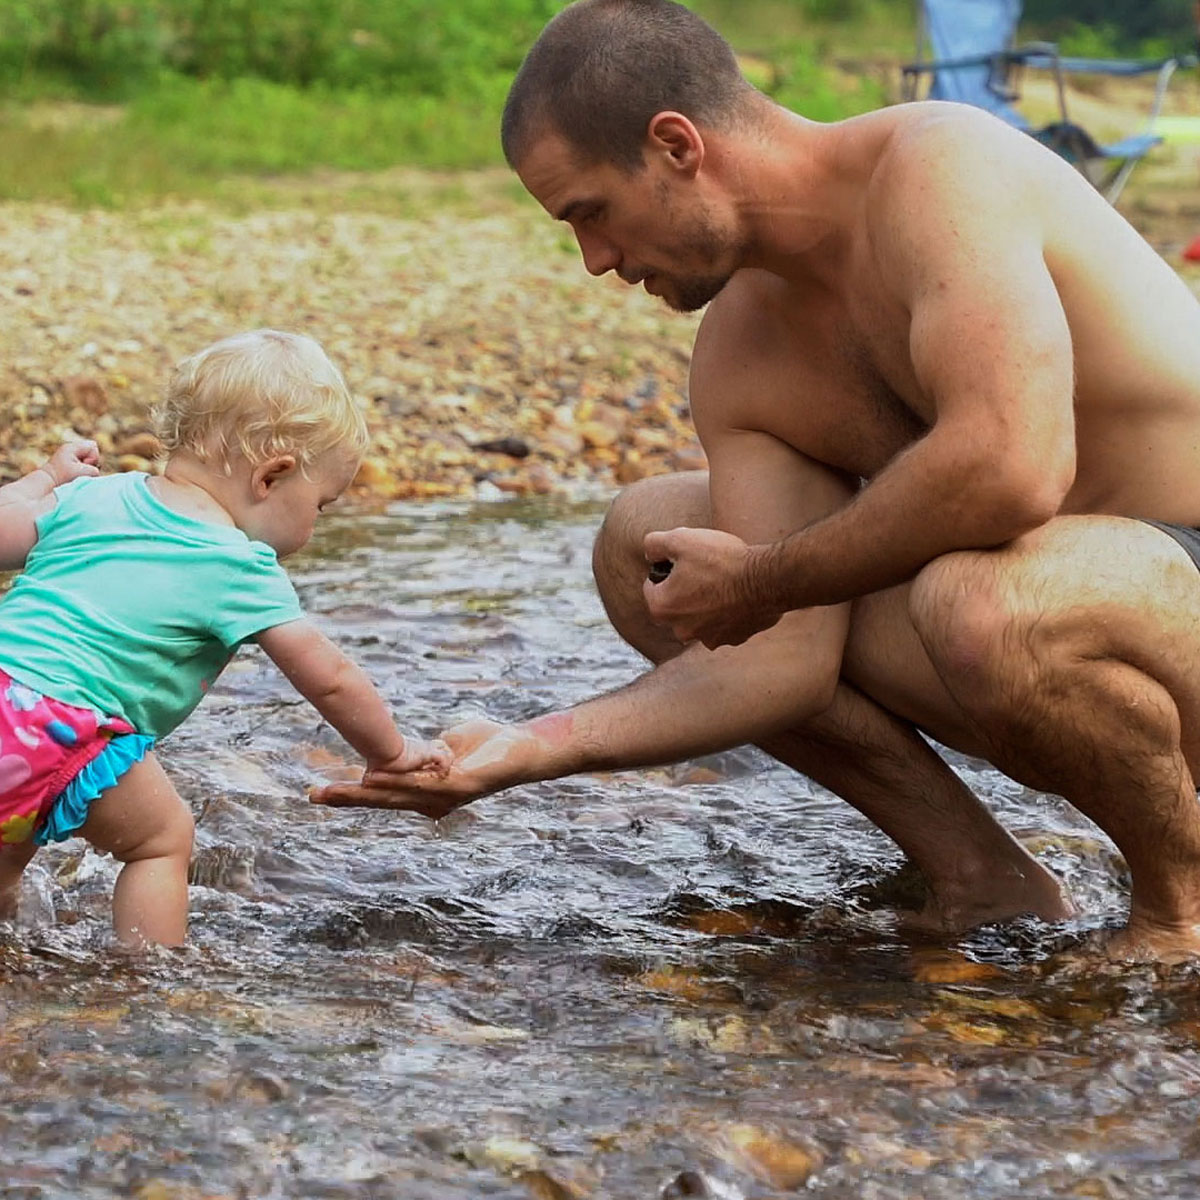 A shirtless man holds out a stone to a little girl in the water